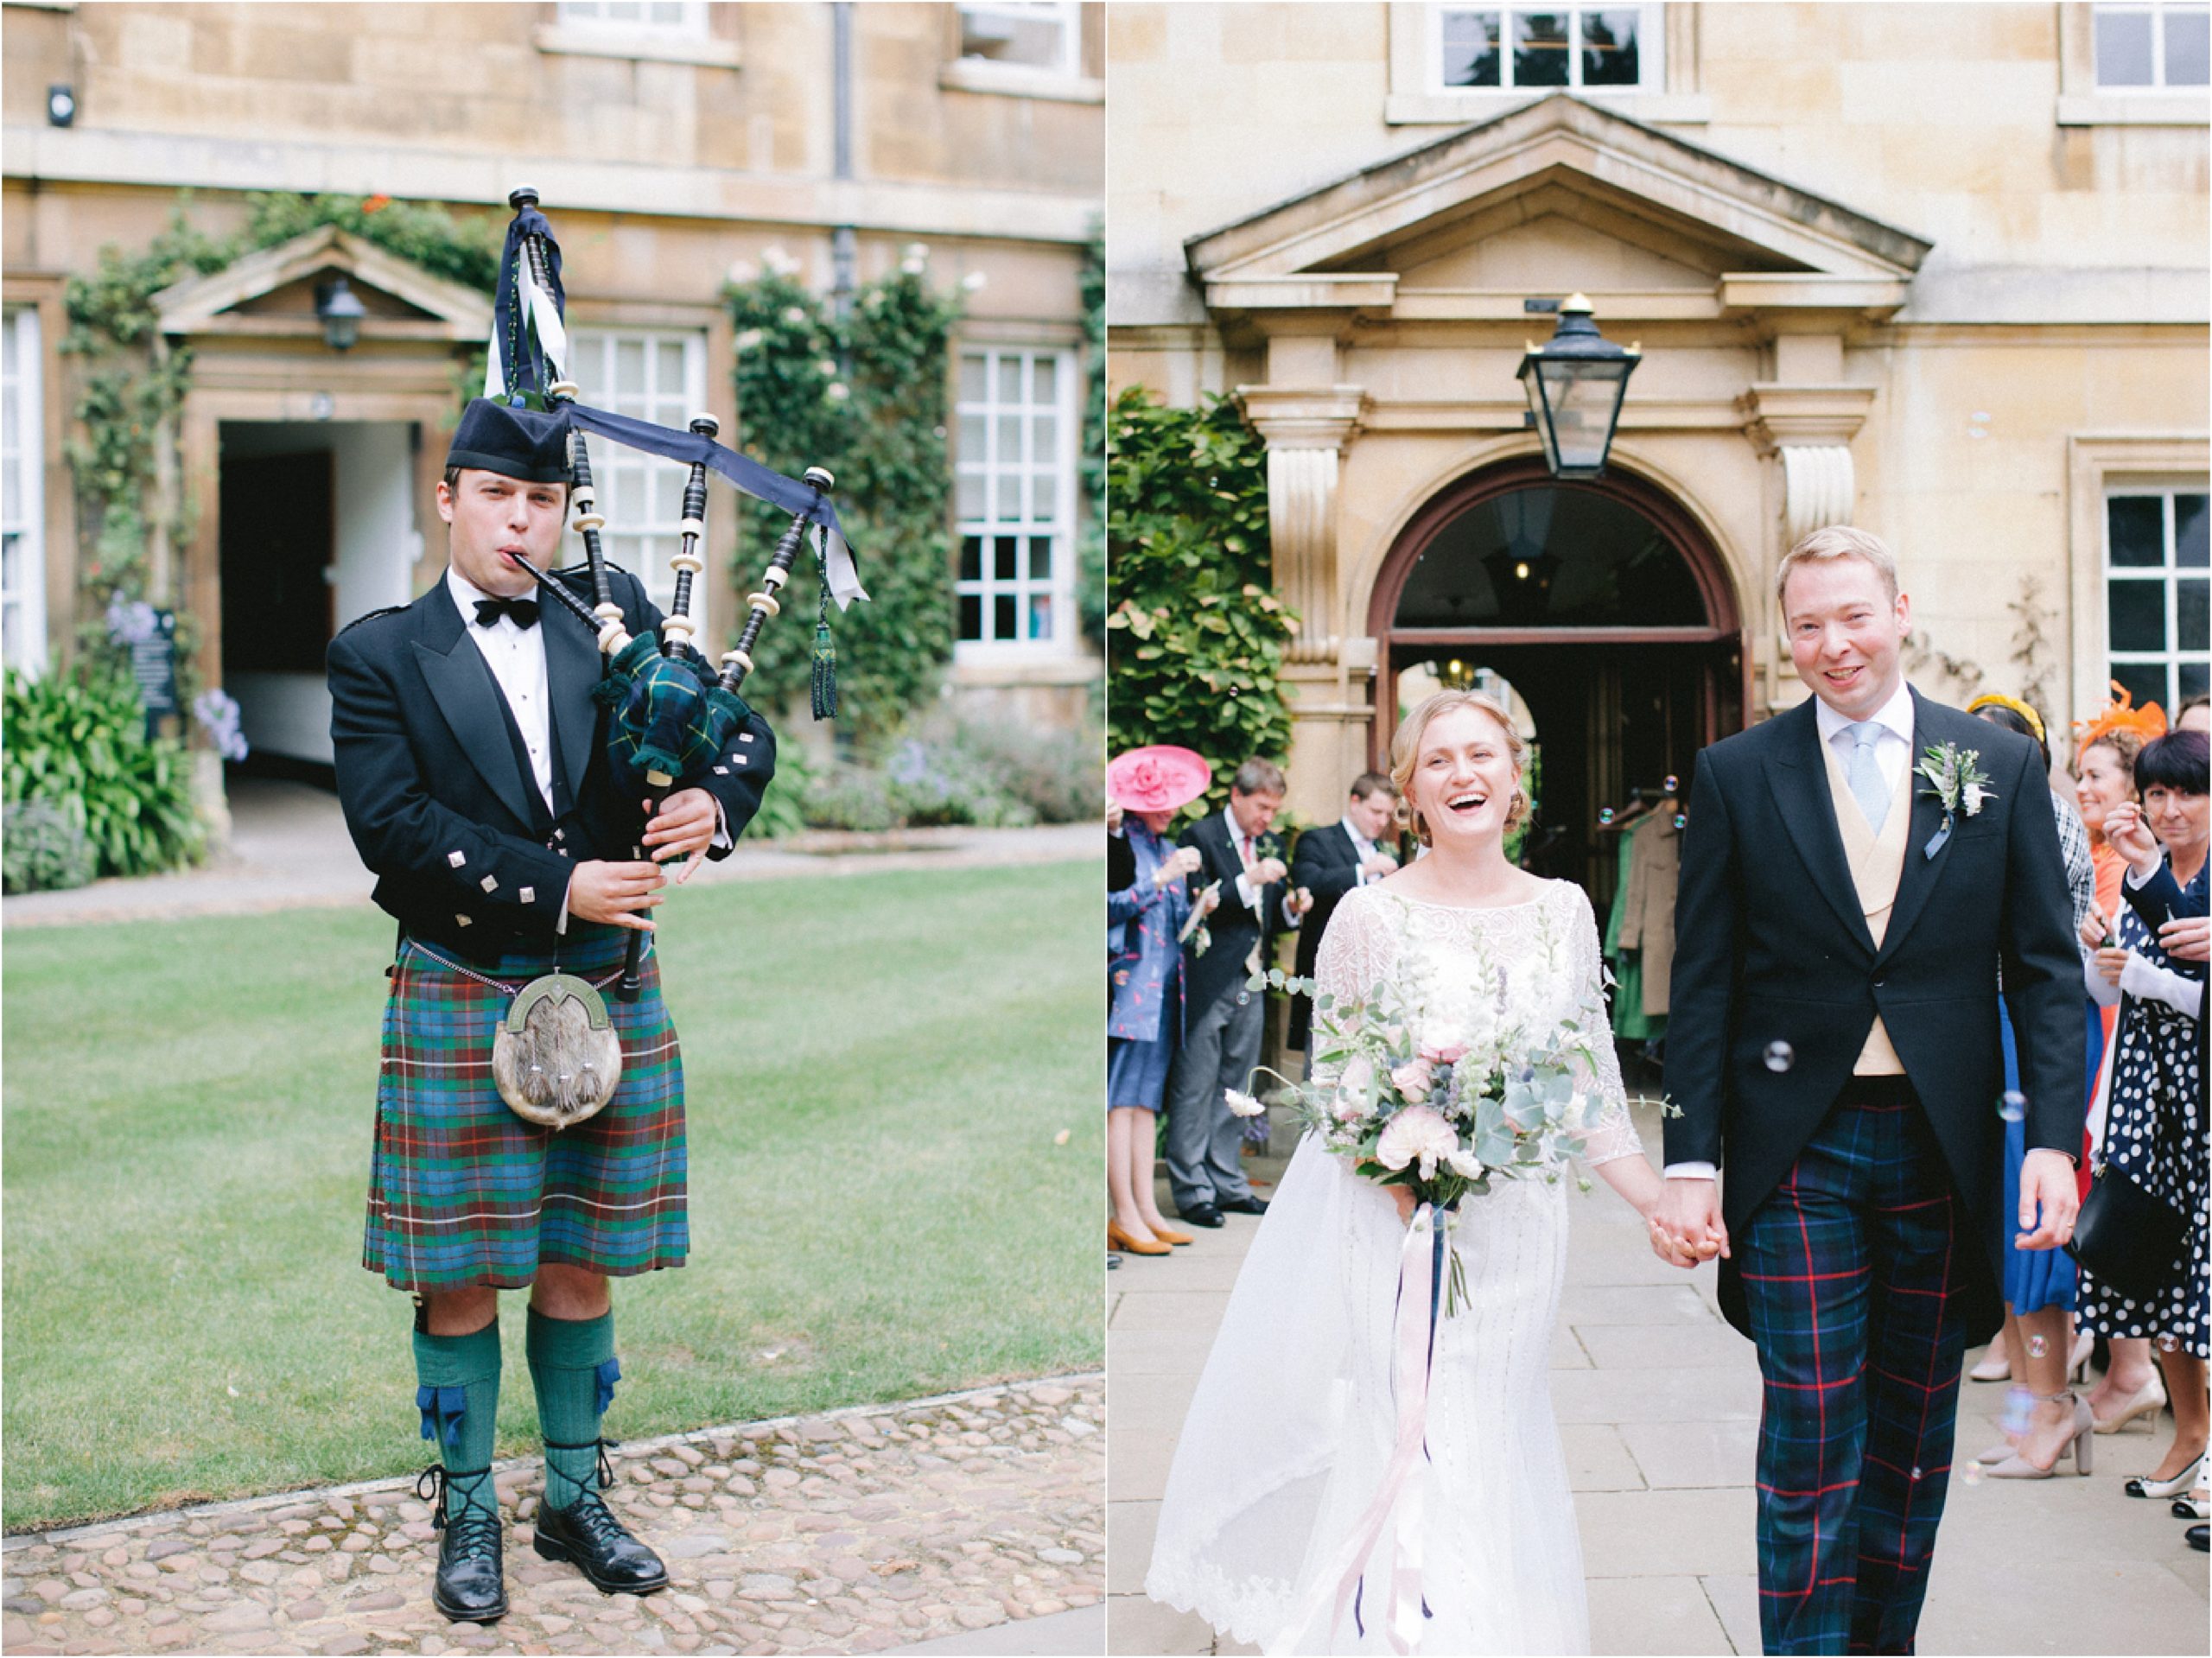 bride and groom with bagpipe player at elegant English wedding